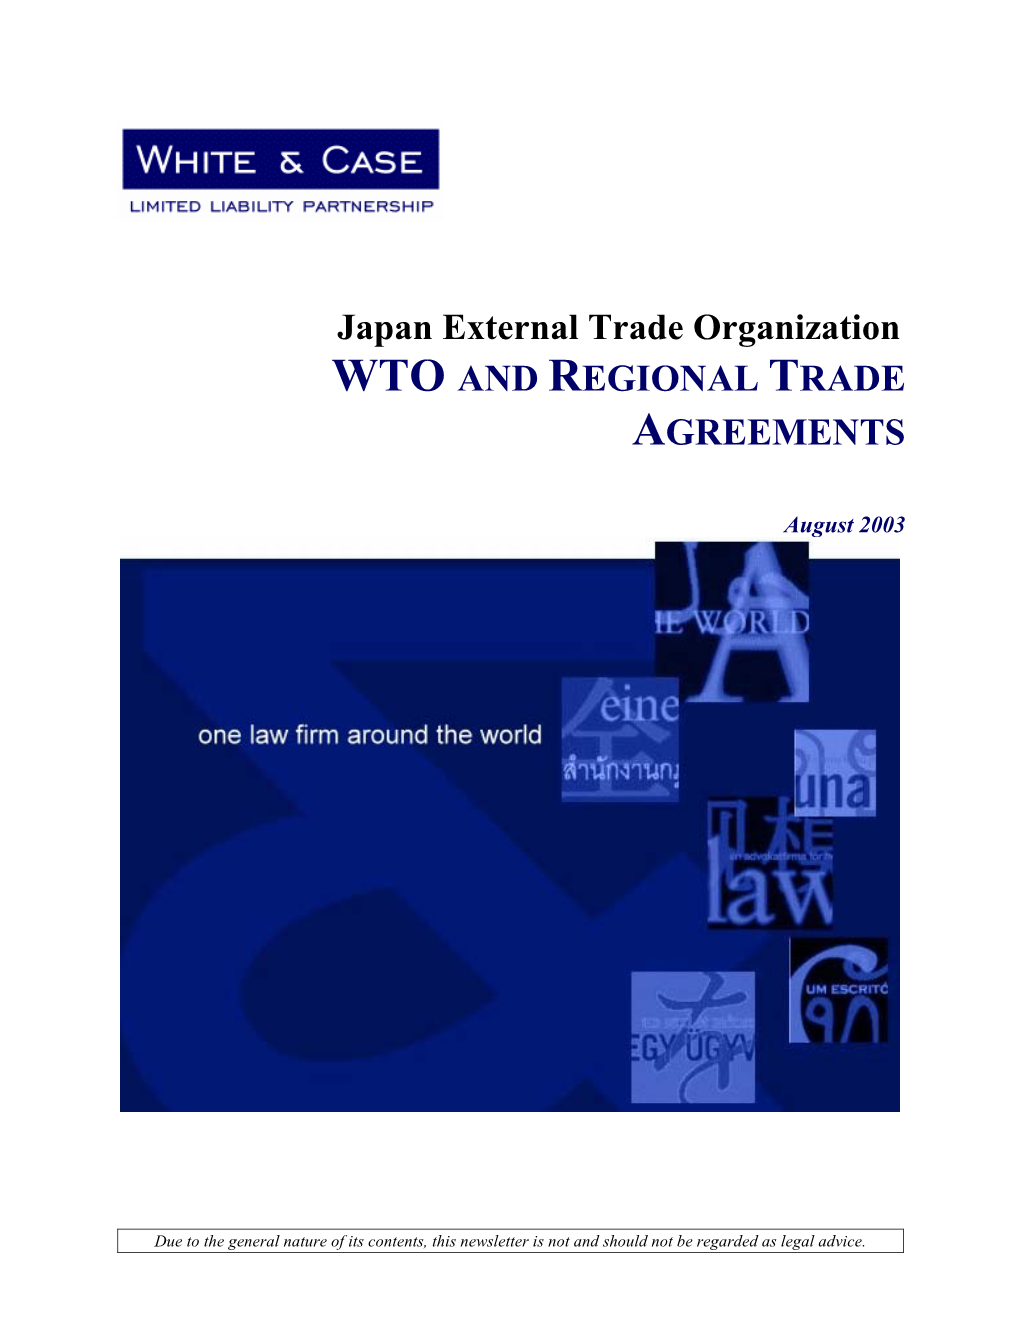 Wto and Regional Trade Agreements